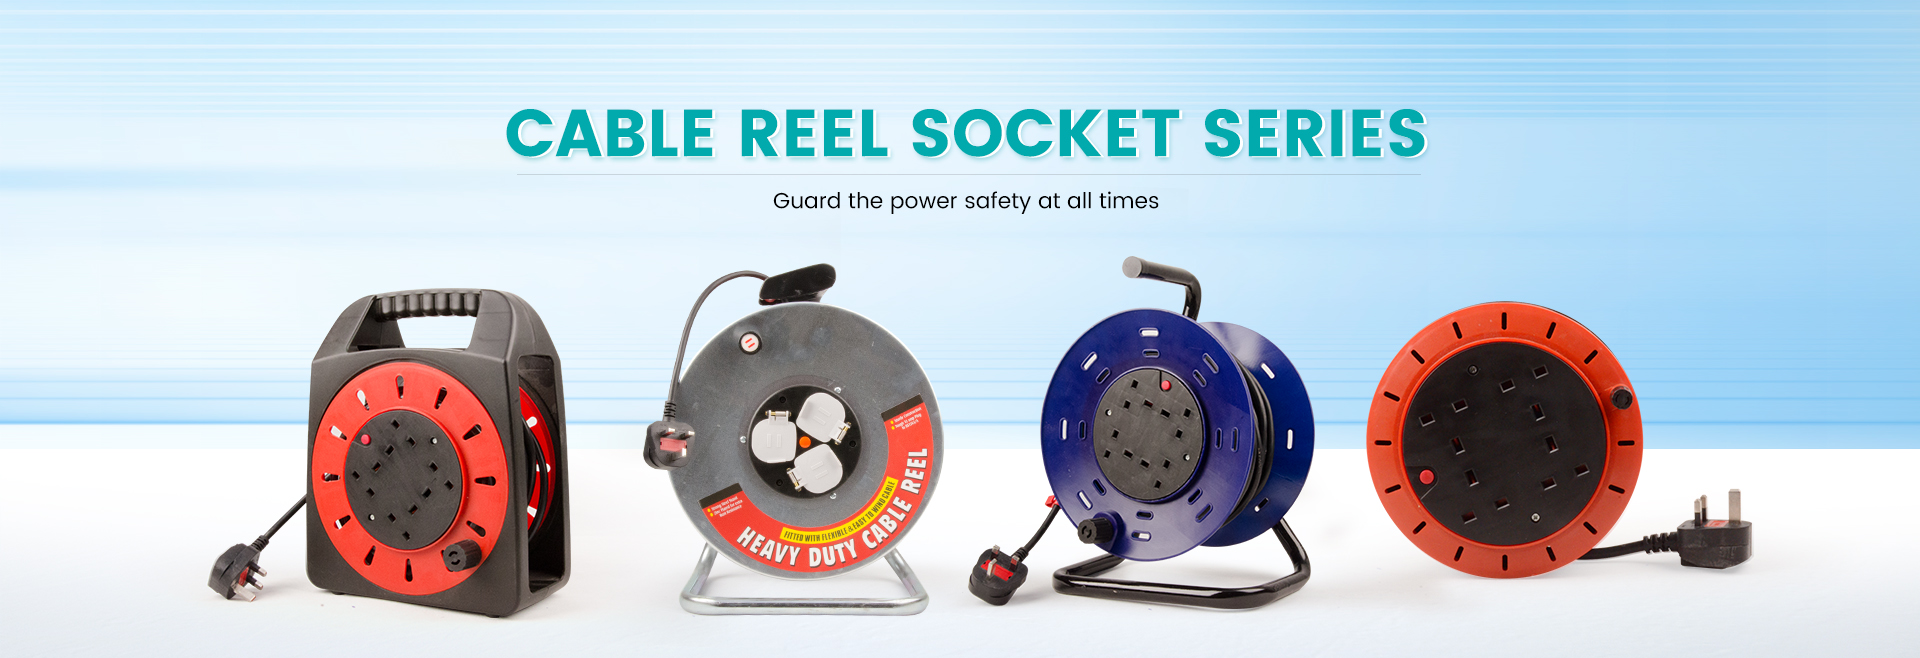 Insul-8 Cable Reel 142100604021  Industrial Power & Control – Industrial  Power & Control Inc.